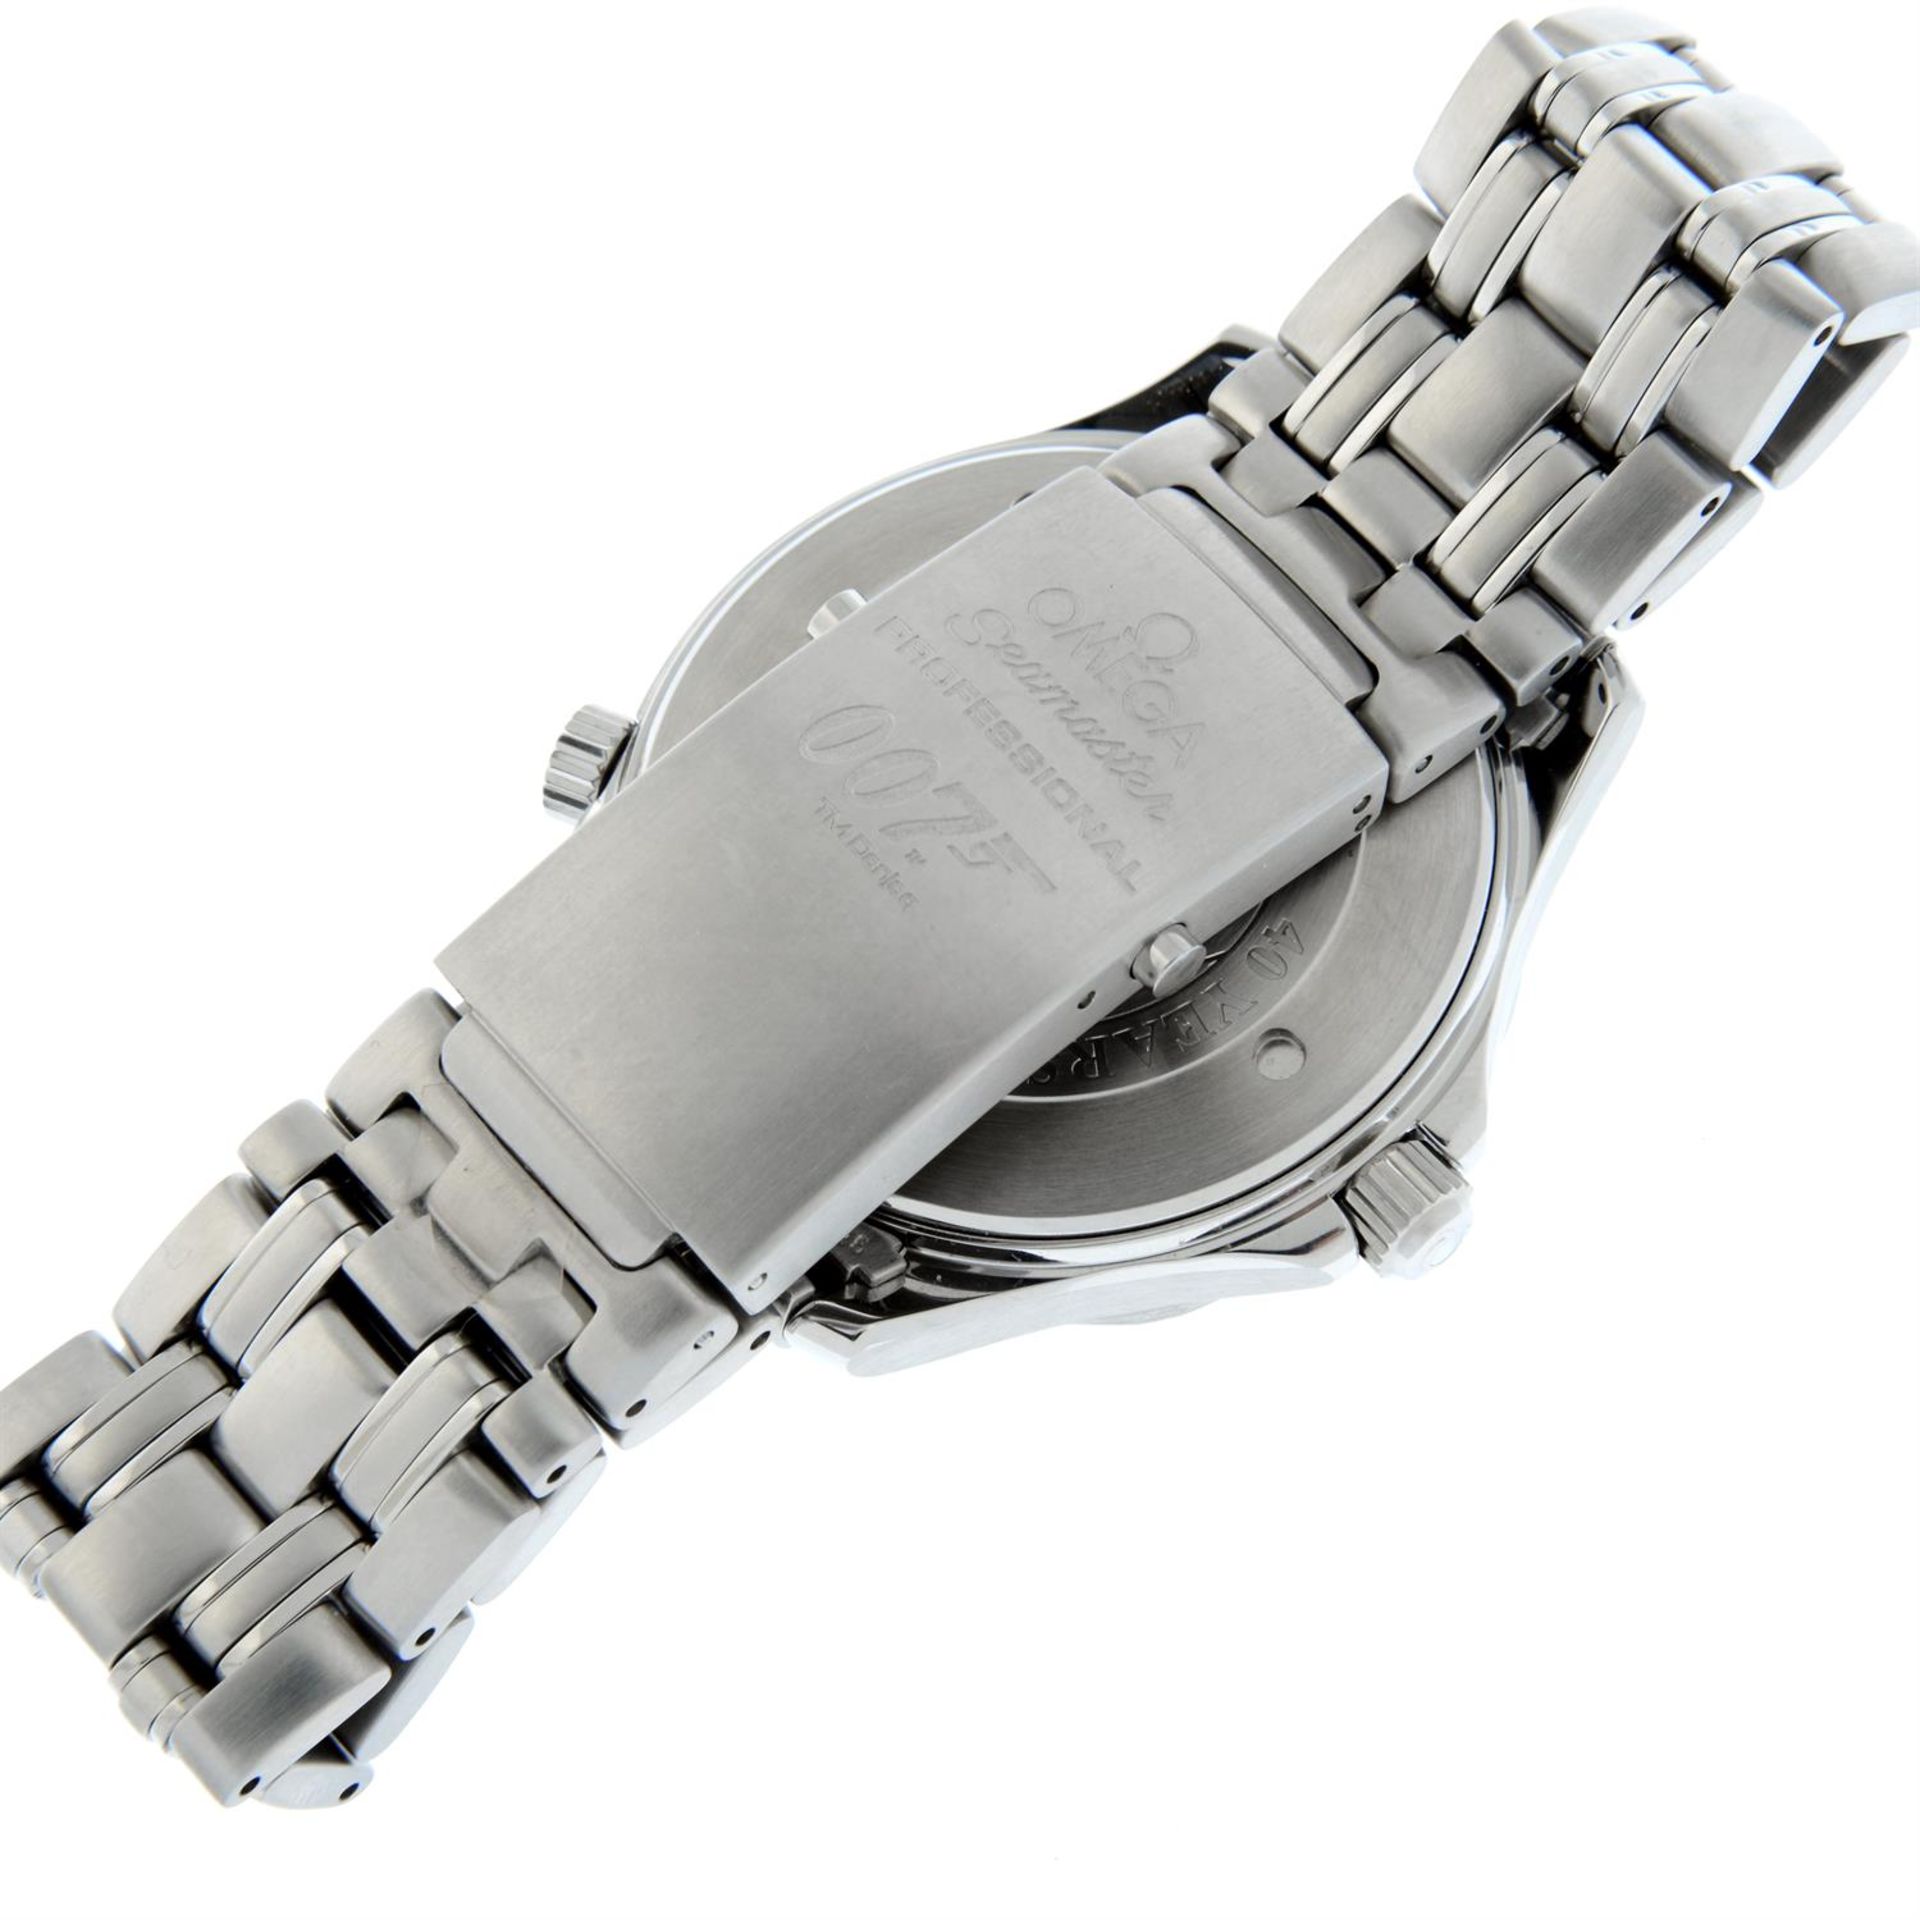 OMEGA - a limited edition stainless steel Seamaster 007 bracelet watch, 41mm. - Image 2 of 7